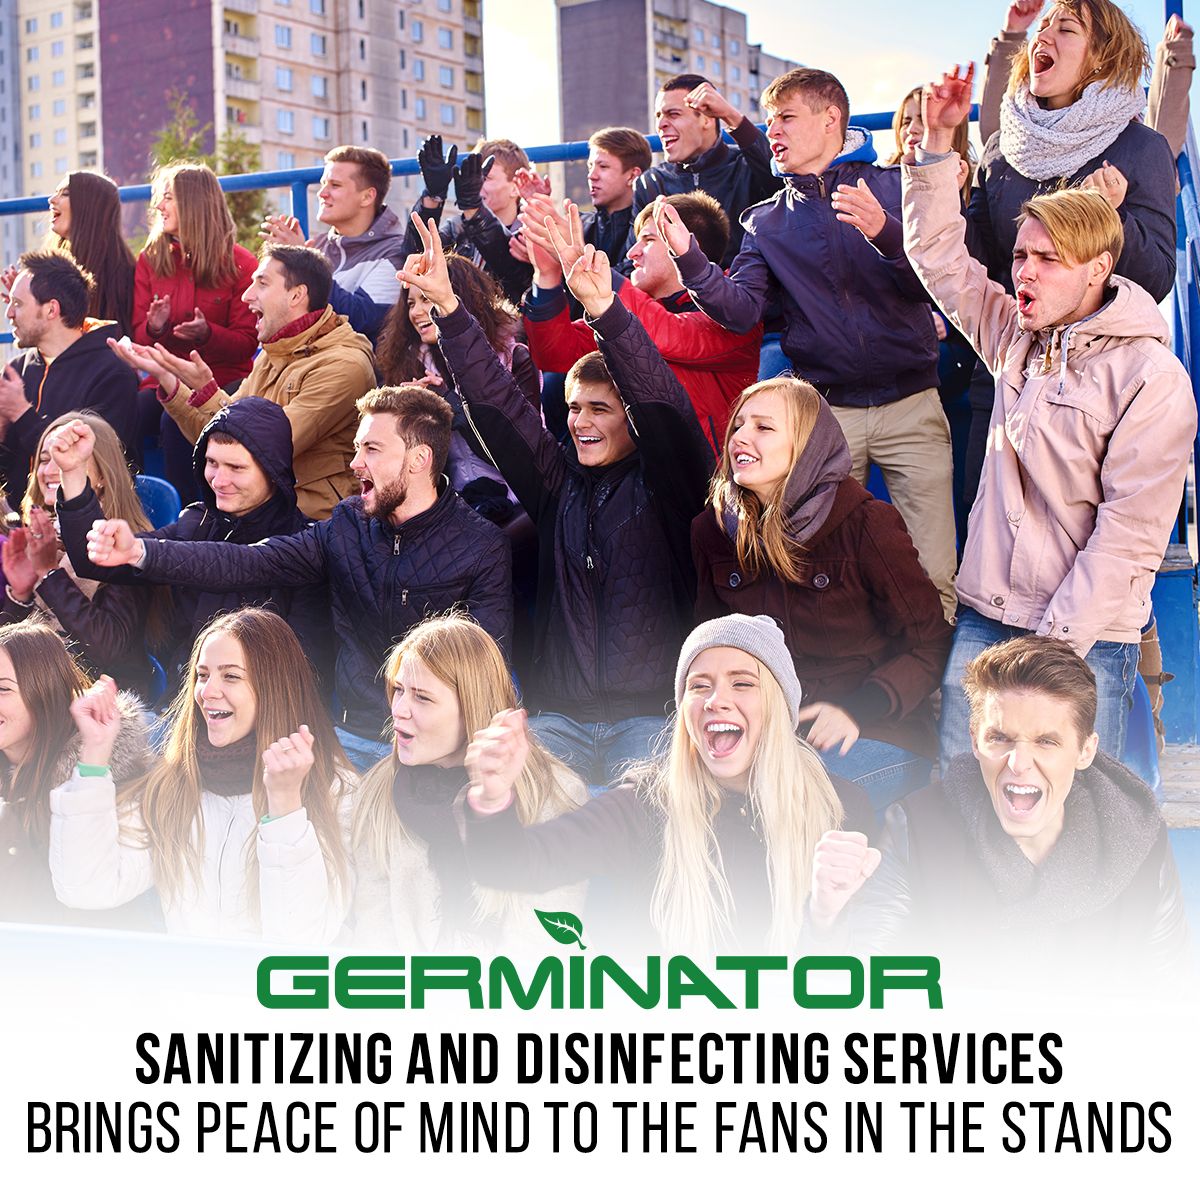 Germinator Sanitizing and Disinfecting Services Brings Peace of Mind to the Fans in the Stands